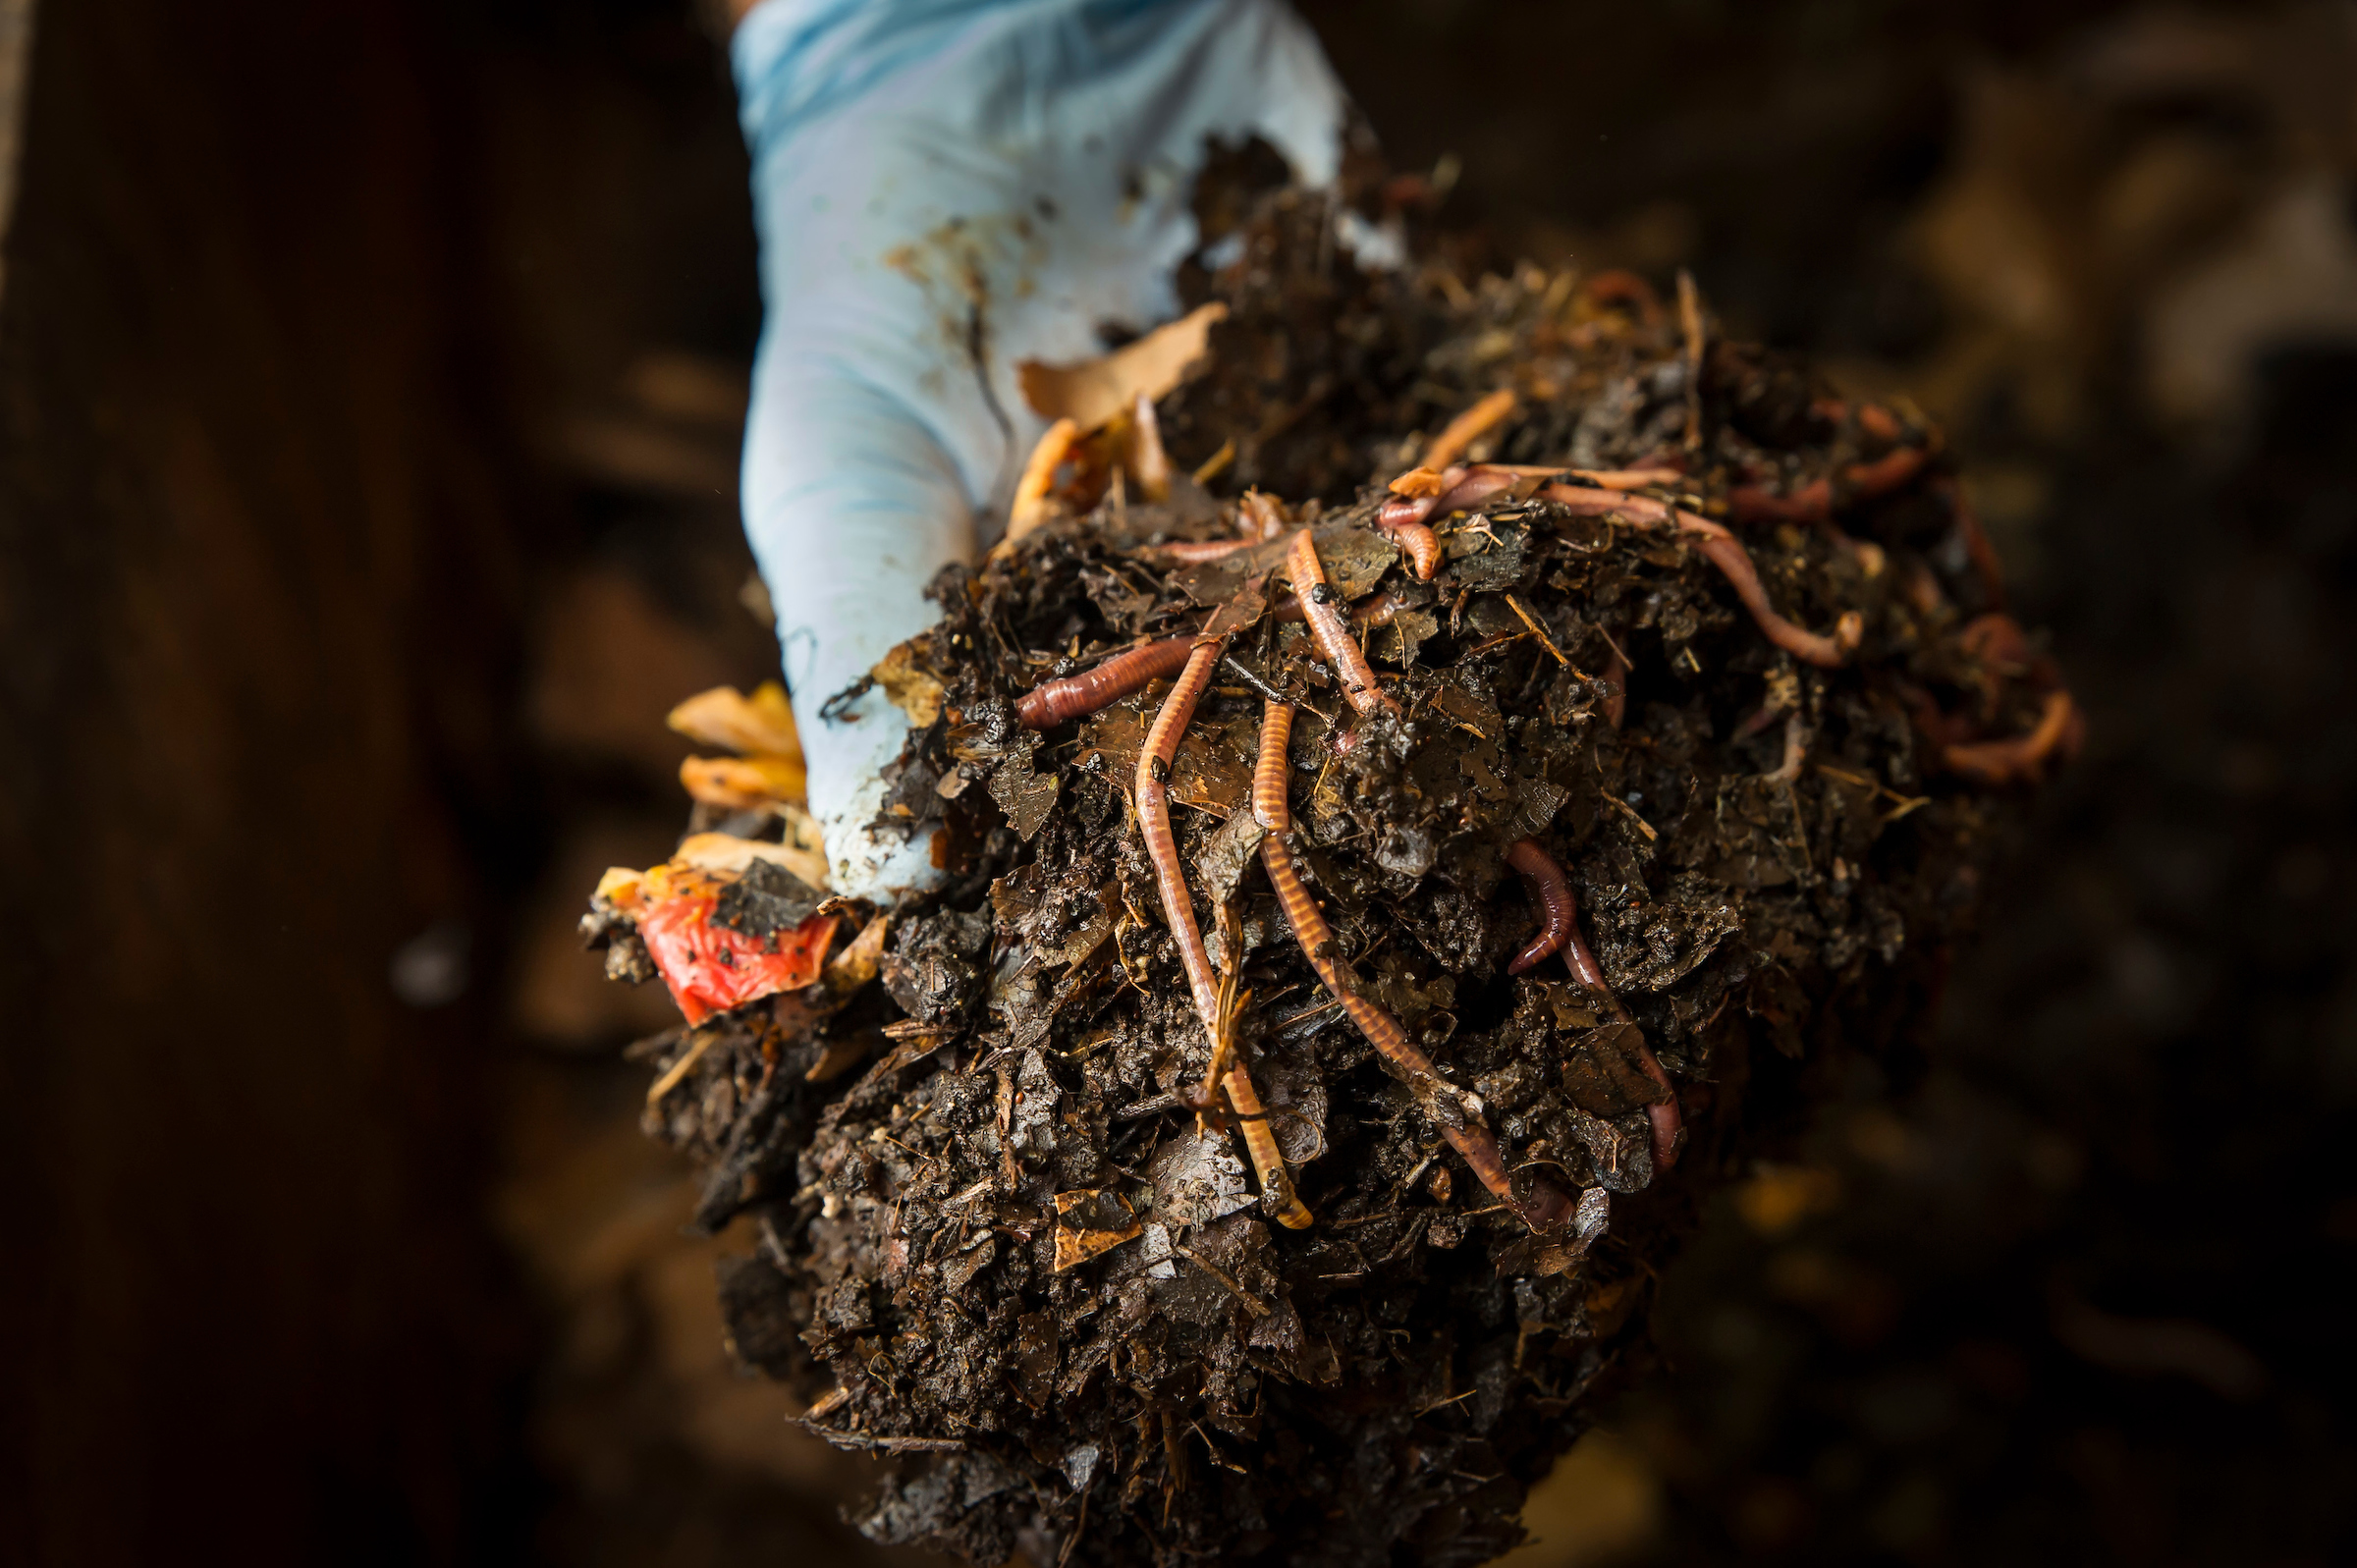 Community Soil Health and Compost Workshop Coming up March 10 